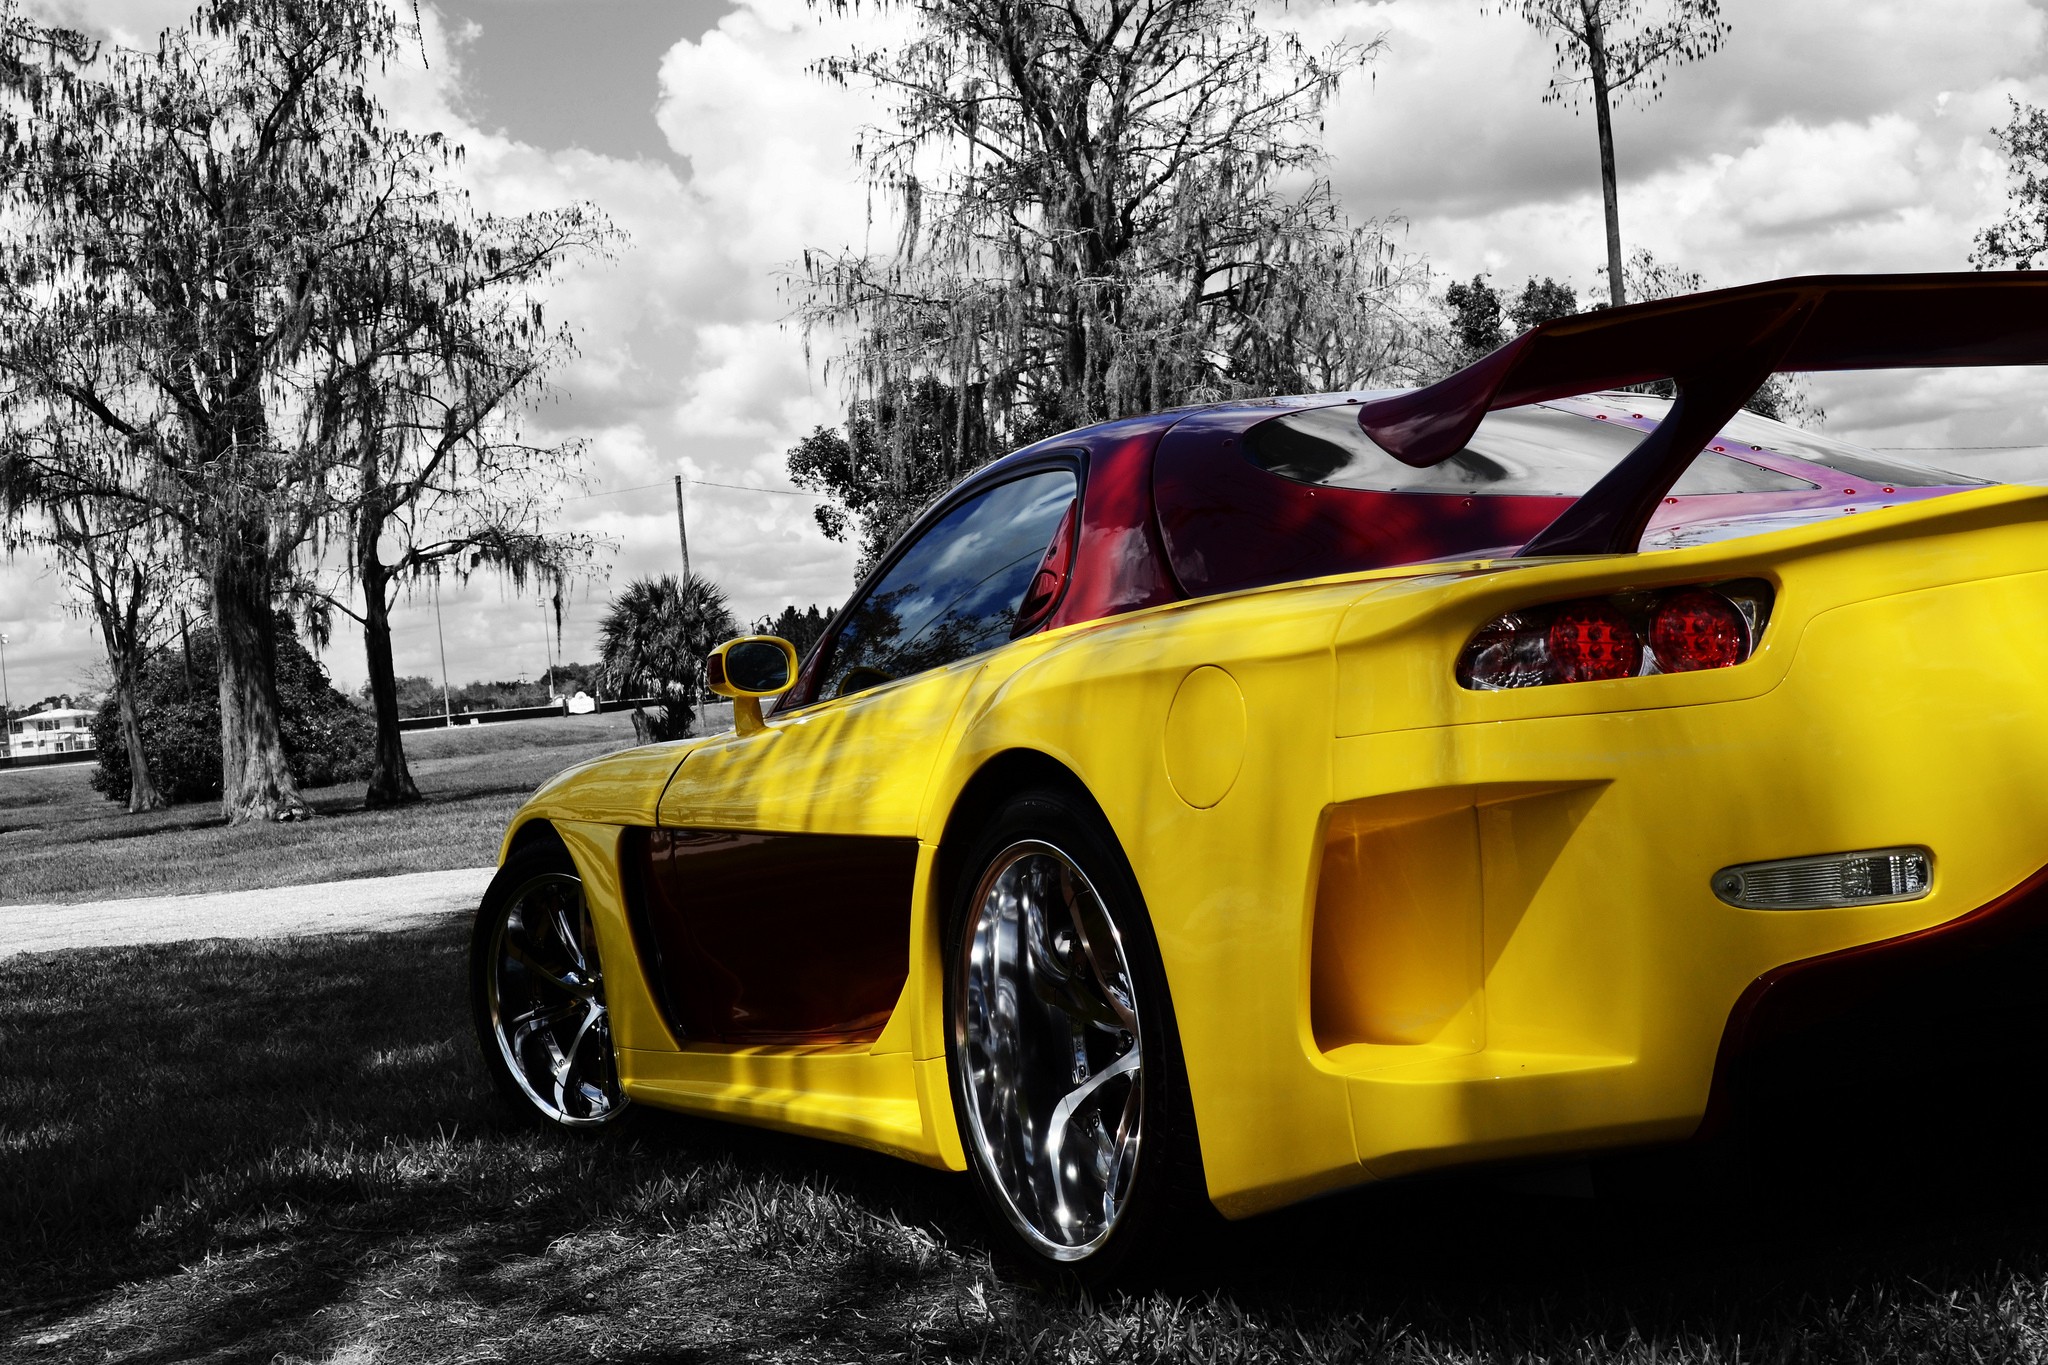 General 2048x1365 car Mazda RX-7 Veilside selective coloring Mazda vehicle yellow cars Japanese cars coupe bodykit